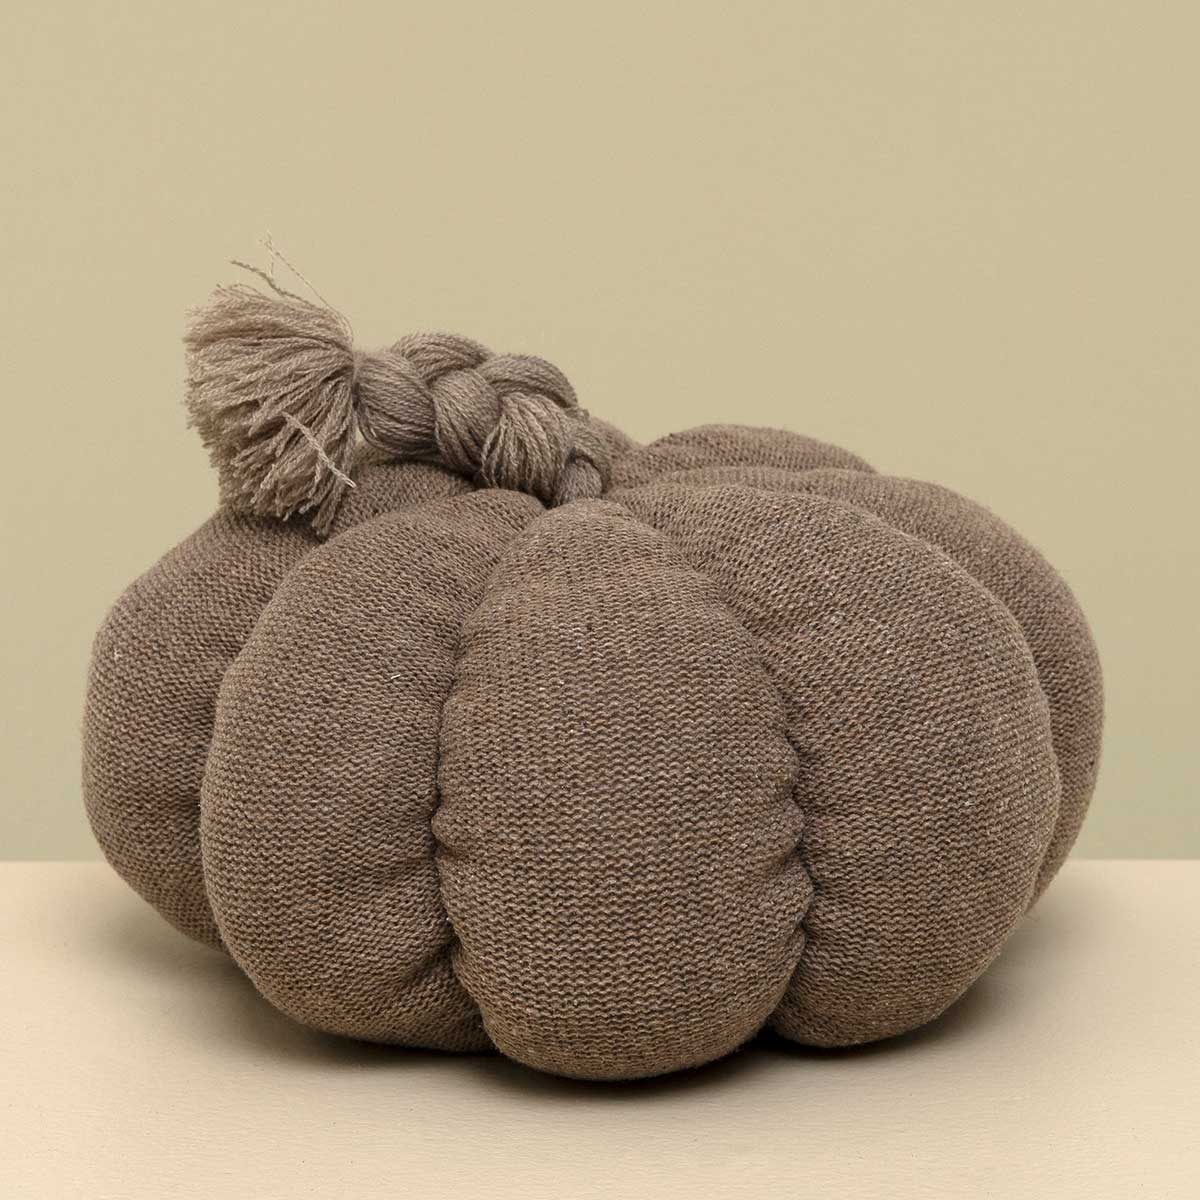 KNIT PUMPKIN PLUSH TAUPE WITH BRAIDED STEM EXTRA LARGE - Click Image to Close